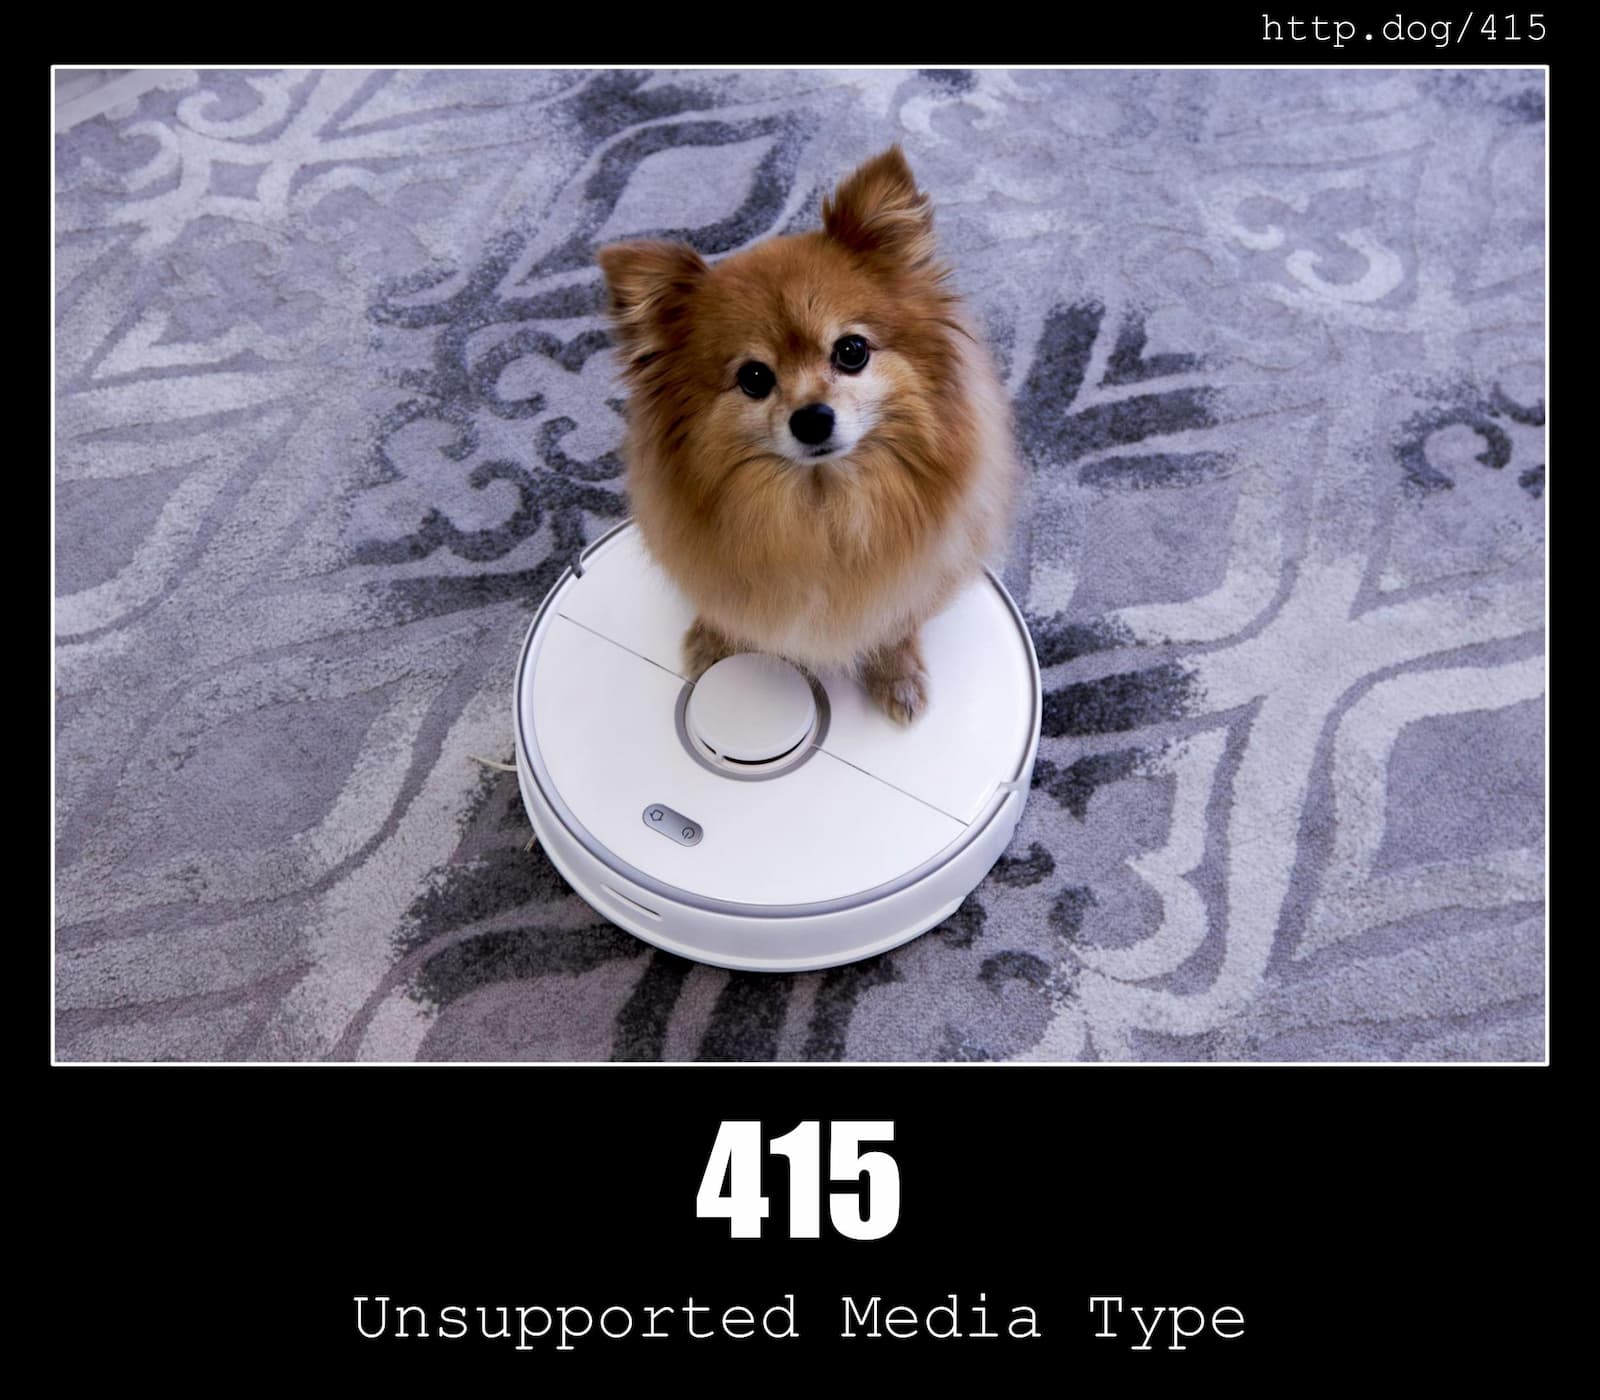 HTTP Status Code 415 Unsupported Media Type